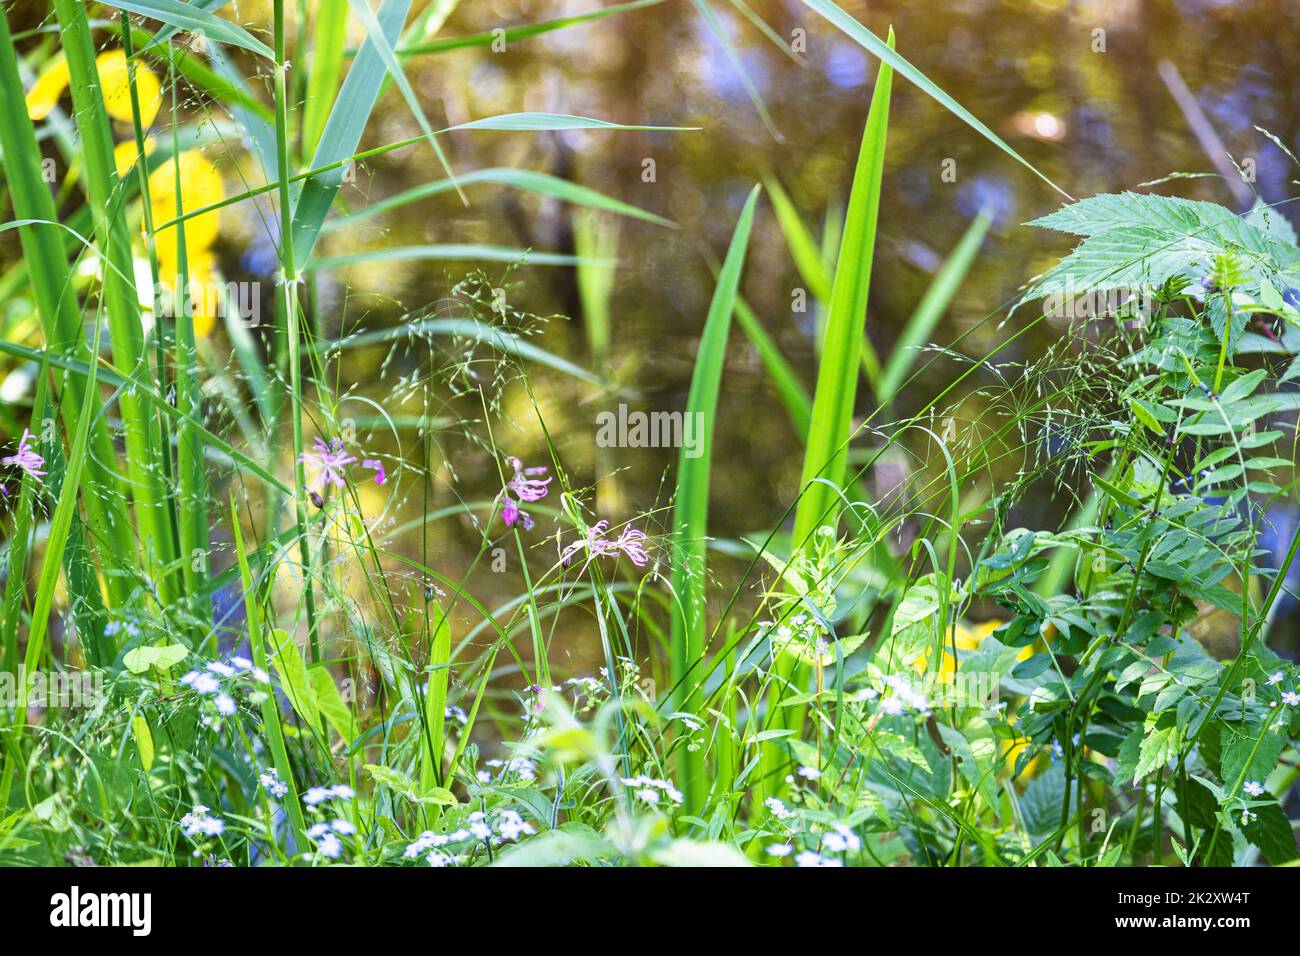 green grass close up on coast of forest pond Stock Photo